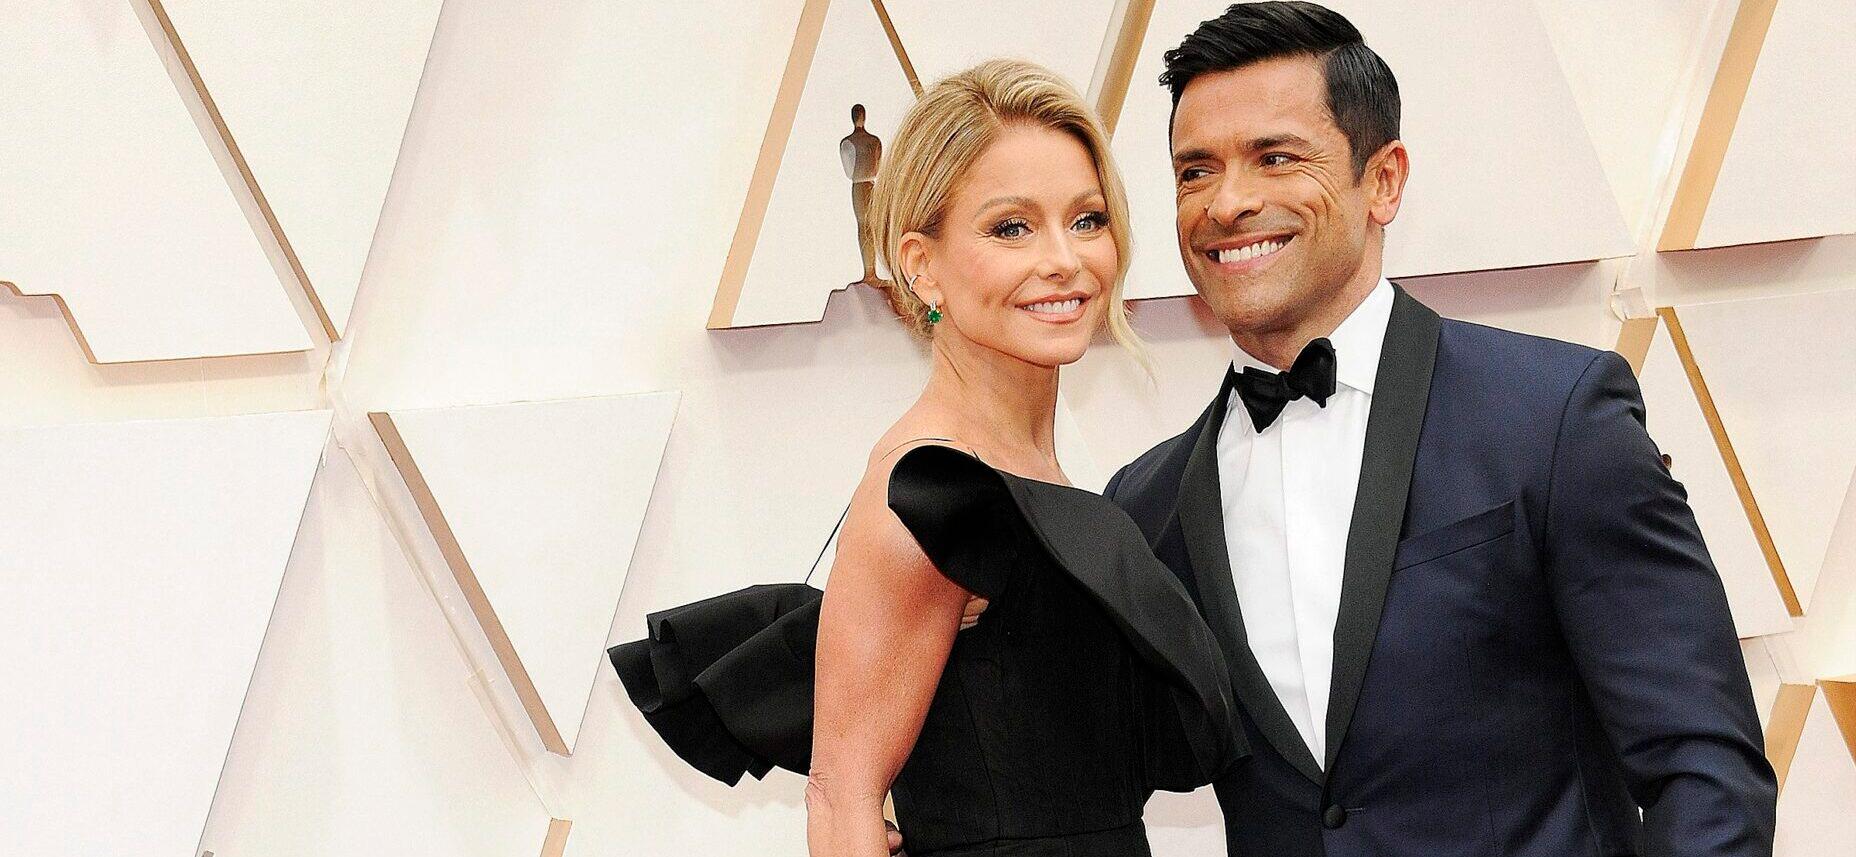 I’m Taking Lessons From Kelly Ripa And Mark Consuelos On How To Handle An Empty Nest